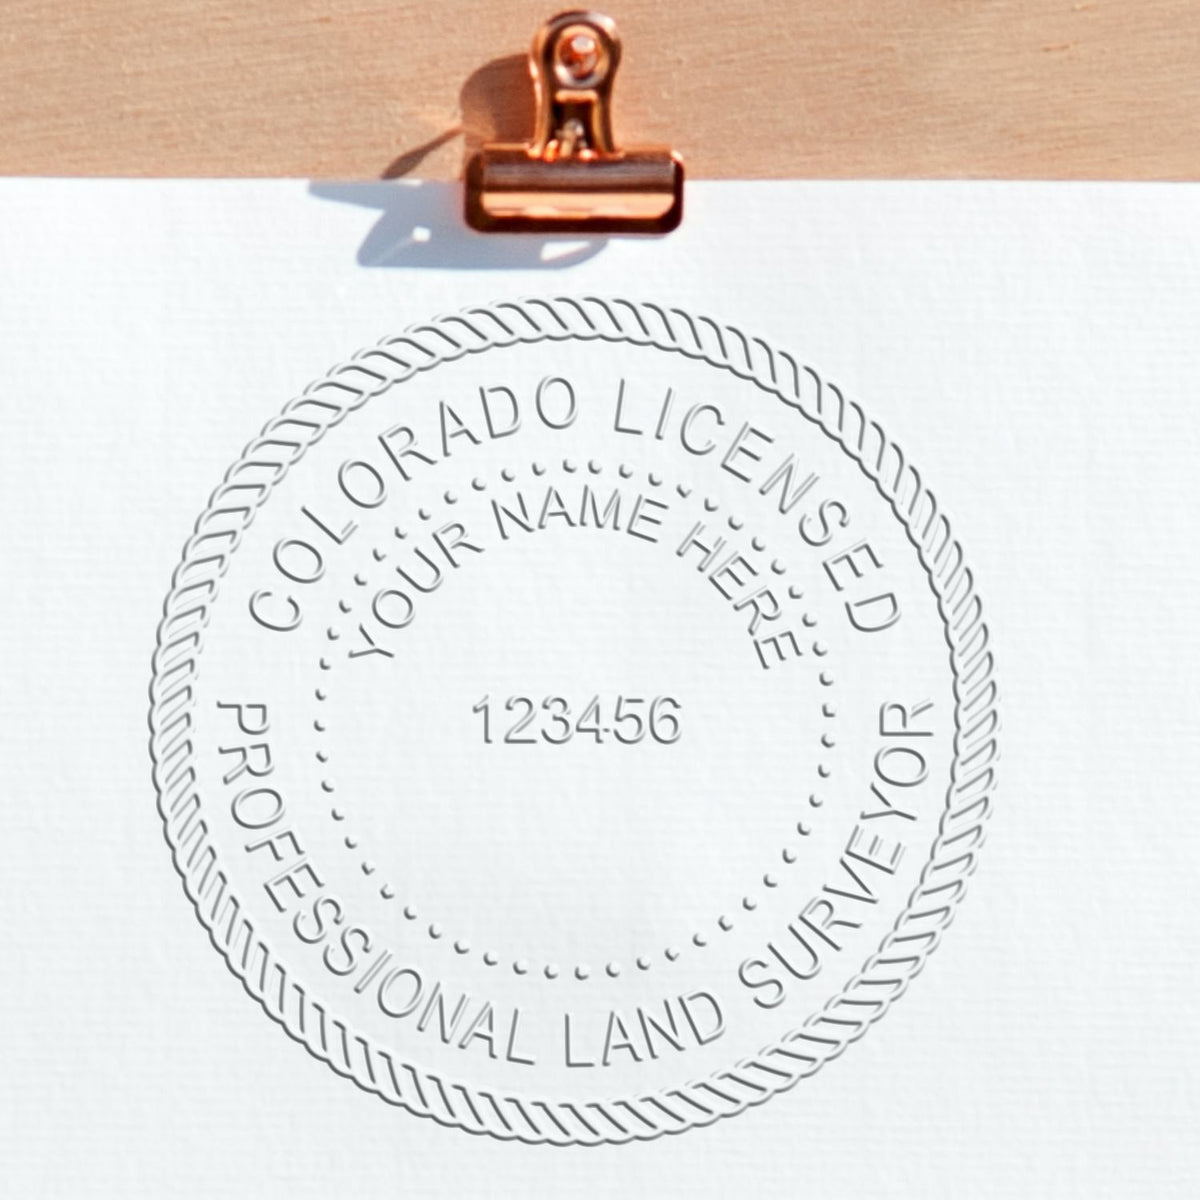 A stamped impression of the Long Reach Colorado Land Surveyor Seal in this stylish lifestyle photo, setting the tone for a unique and personalized product.